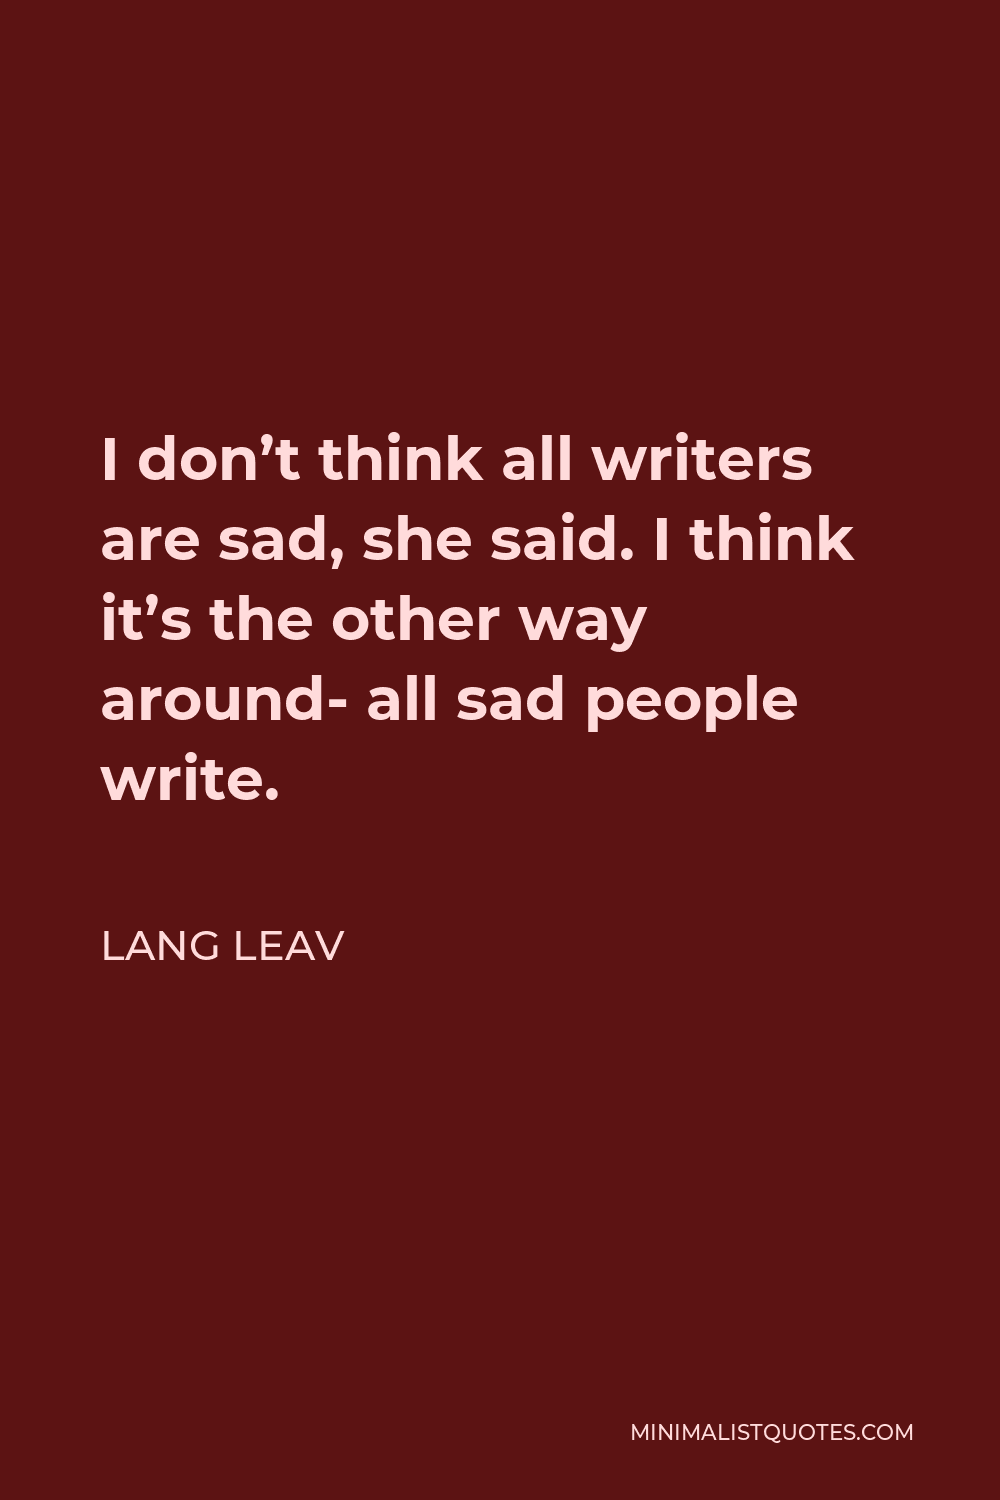 Lang Leav Quote - I don’t think all writers are sad, she said. I think it’s the other way around- all sad people write.